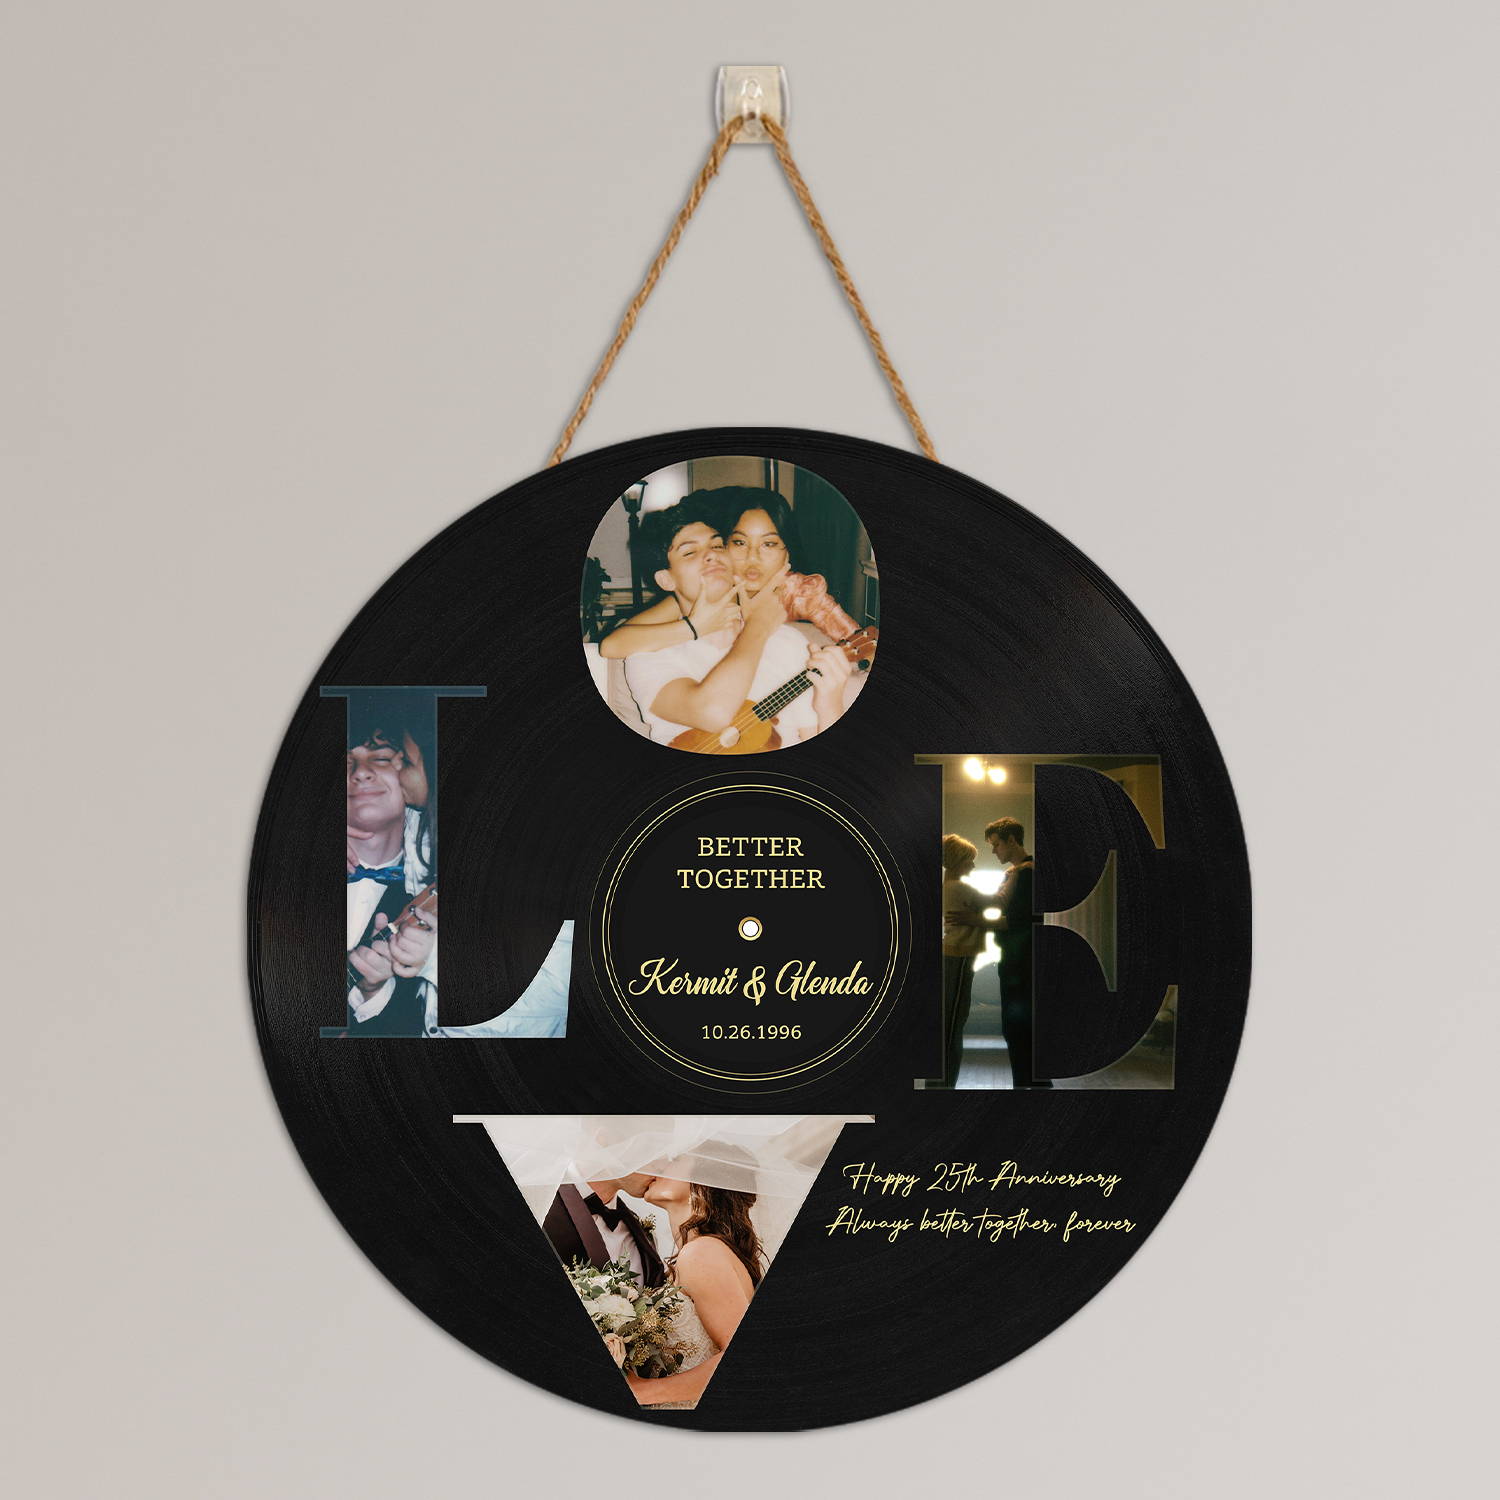 A circle wood sign that prints a photos, name, date, and message on a black color background is the most wonderful anniversary gift